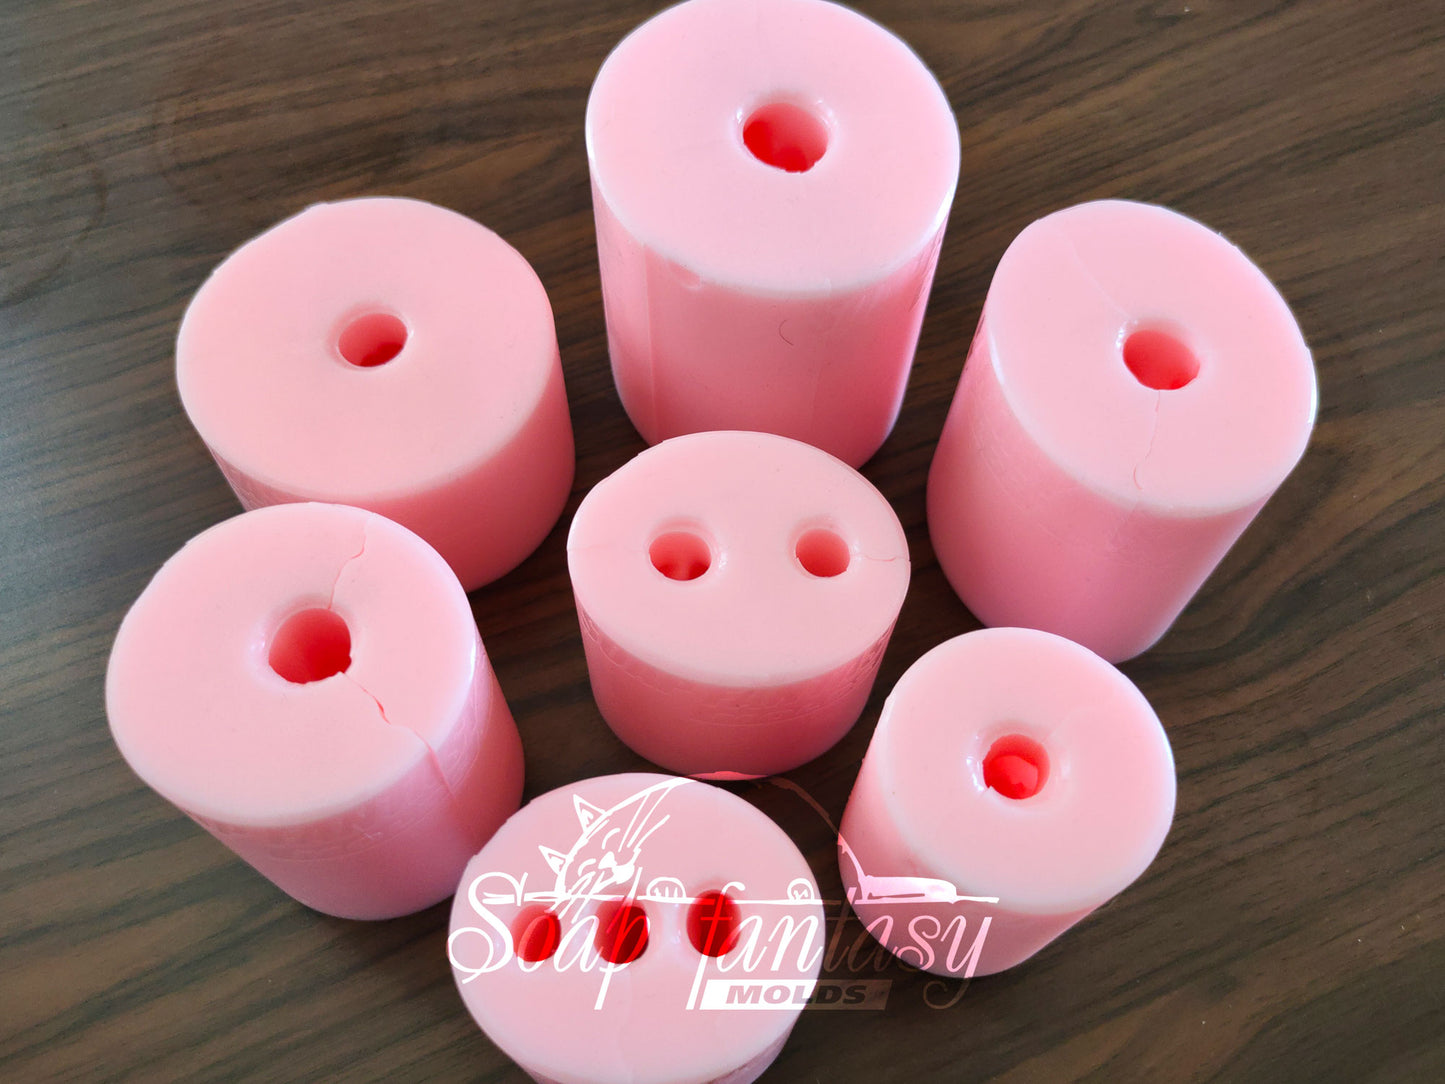 GARAGE SALE >> Big set (7 molds) of Alstroemeria lily flower silicone molds for soap making